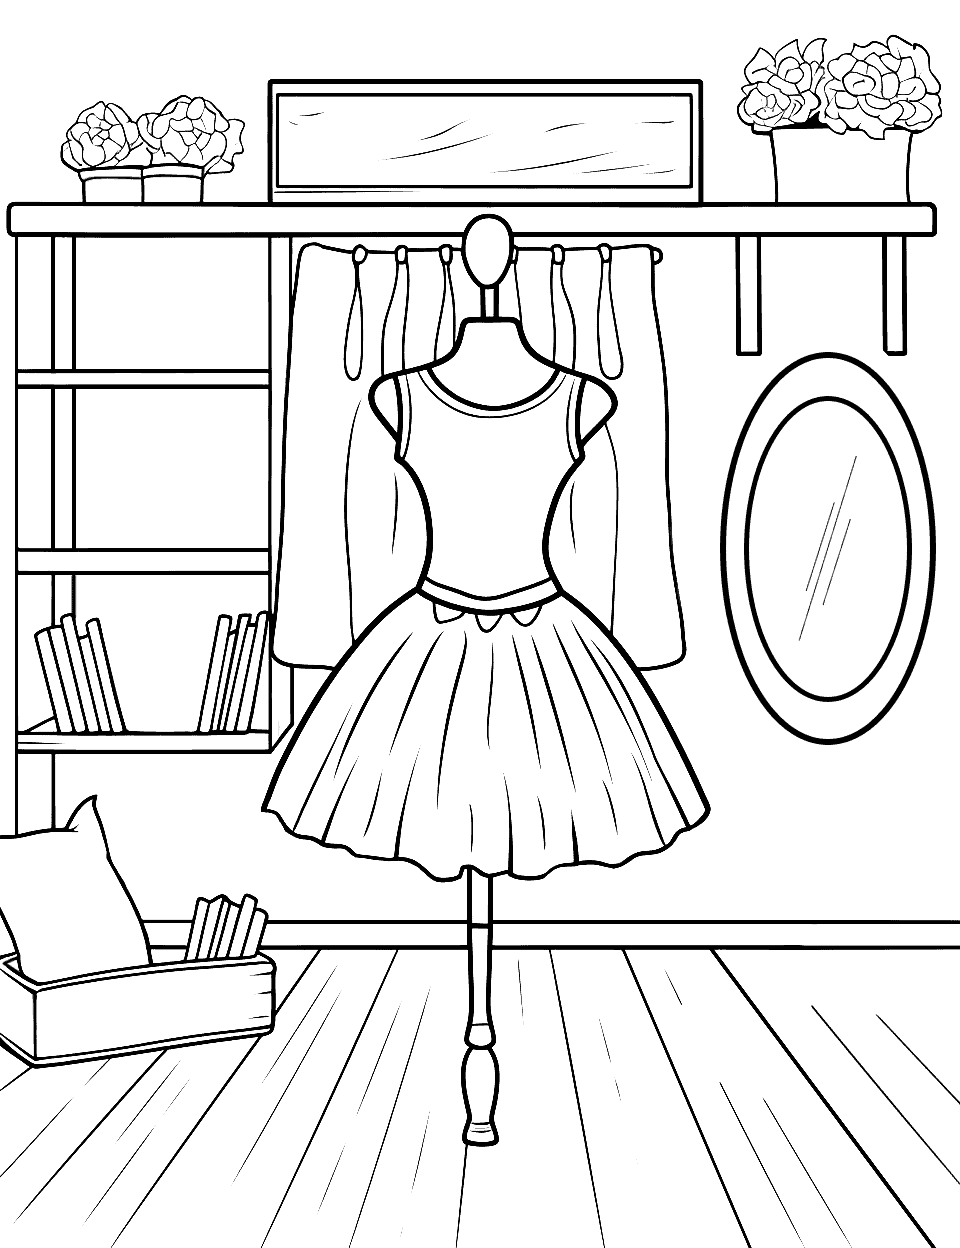 Ballerina's Dressing Room Ballerina Coloring Page - A simple scene of a ballerina’s dressing room with costumes and mirrors.